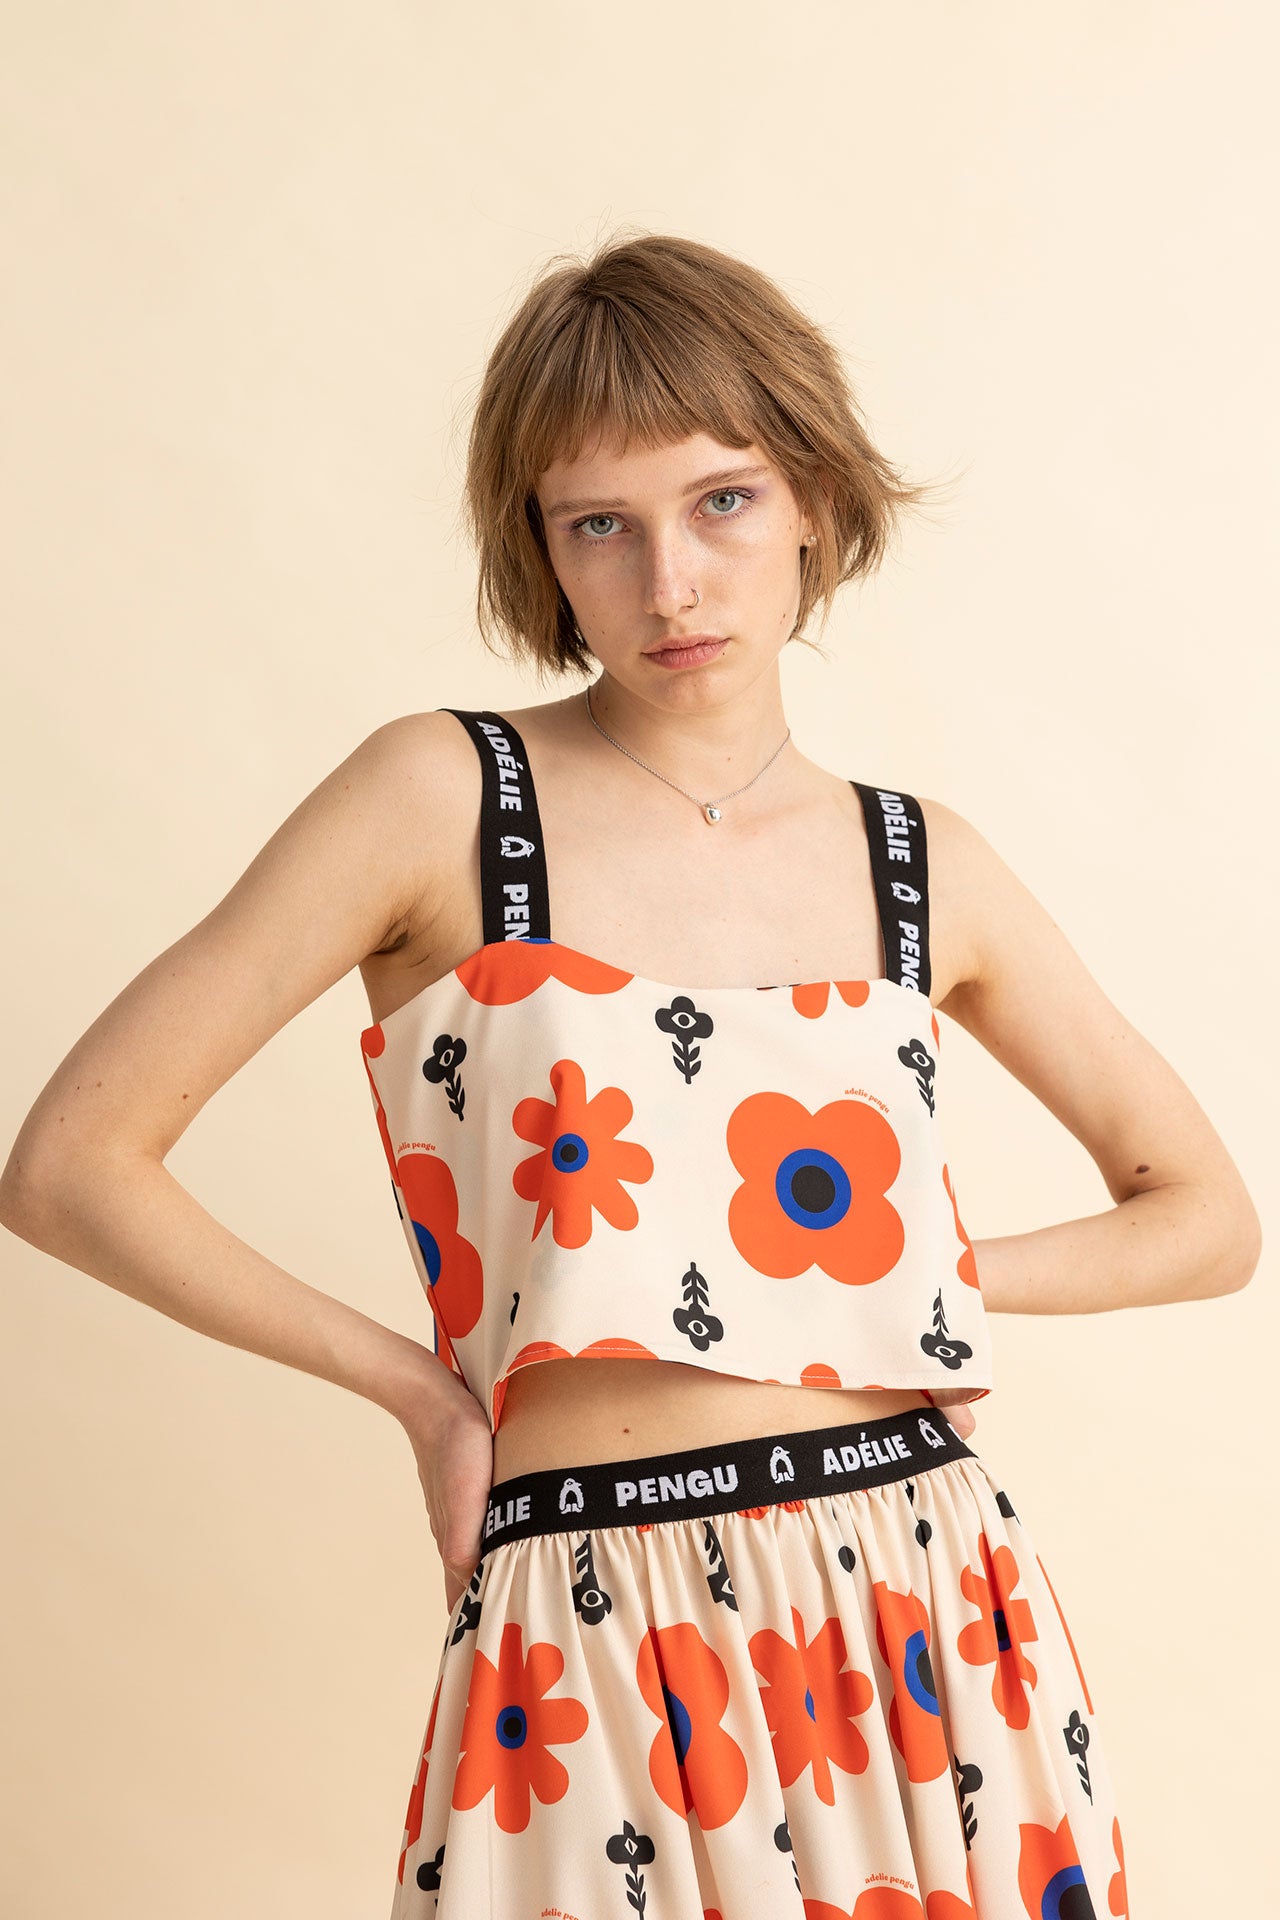 CROPPED TOP CHRISTIE- FLORAL CREATURES